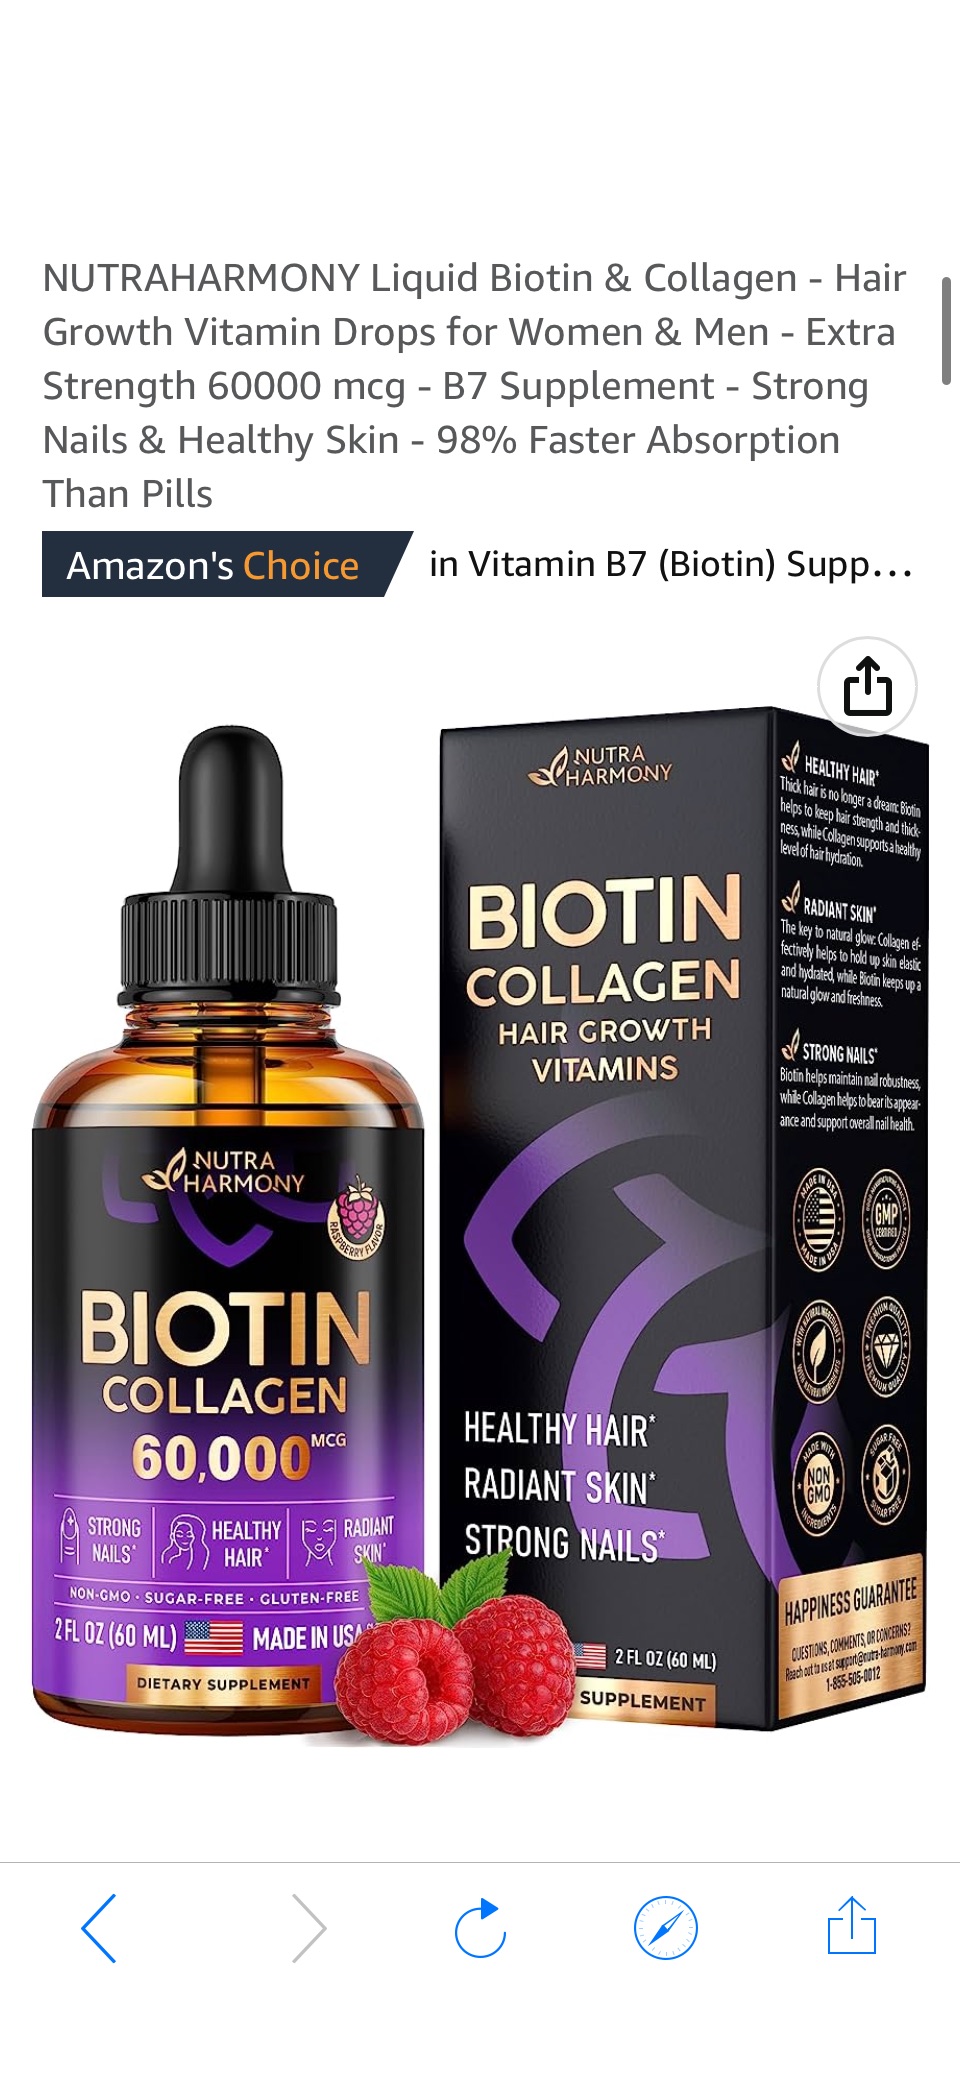 Amazon.com: NUTRAHARMONY Liquid Biotin & Collagen - Hair Growth Vitamin Drops for Women & Men - Extra Strength 60000 mcg - B7 Supplement - Strong Nails & Healthy Skin - 98% Faster Absorption Than Pills : Health & Household原价29.99